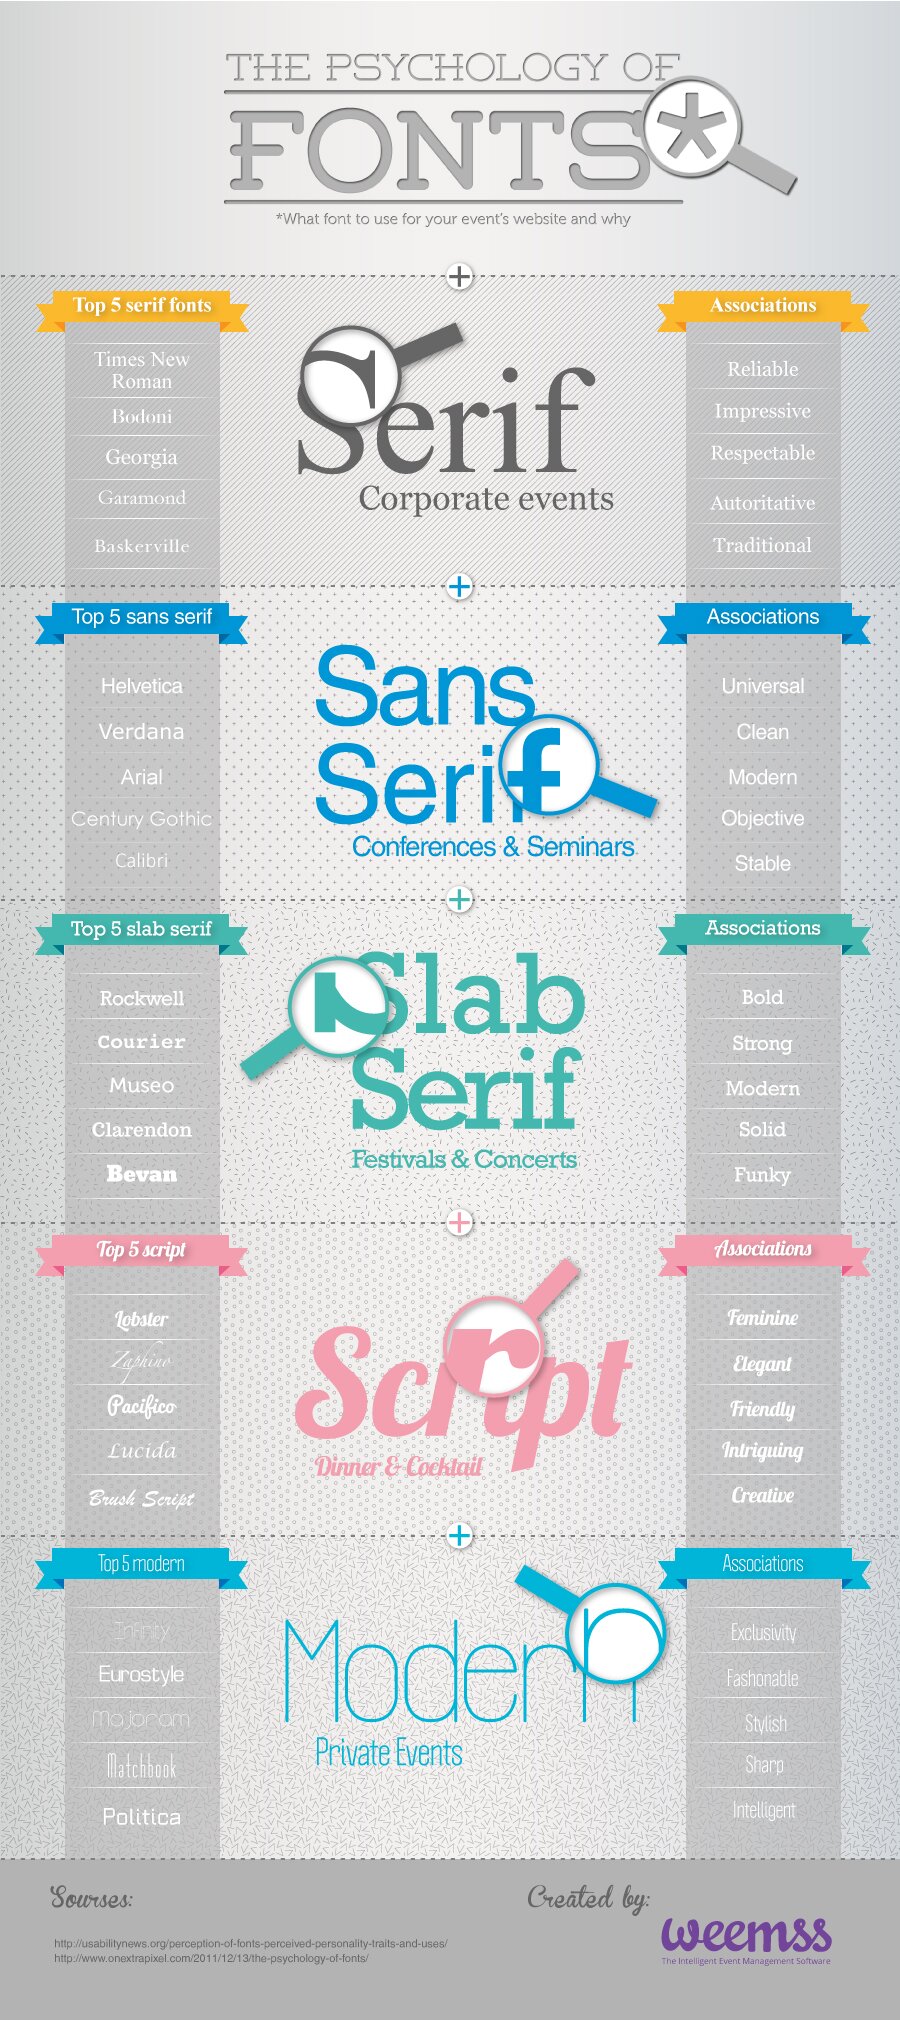 The psychology of fonts